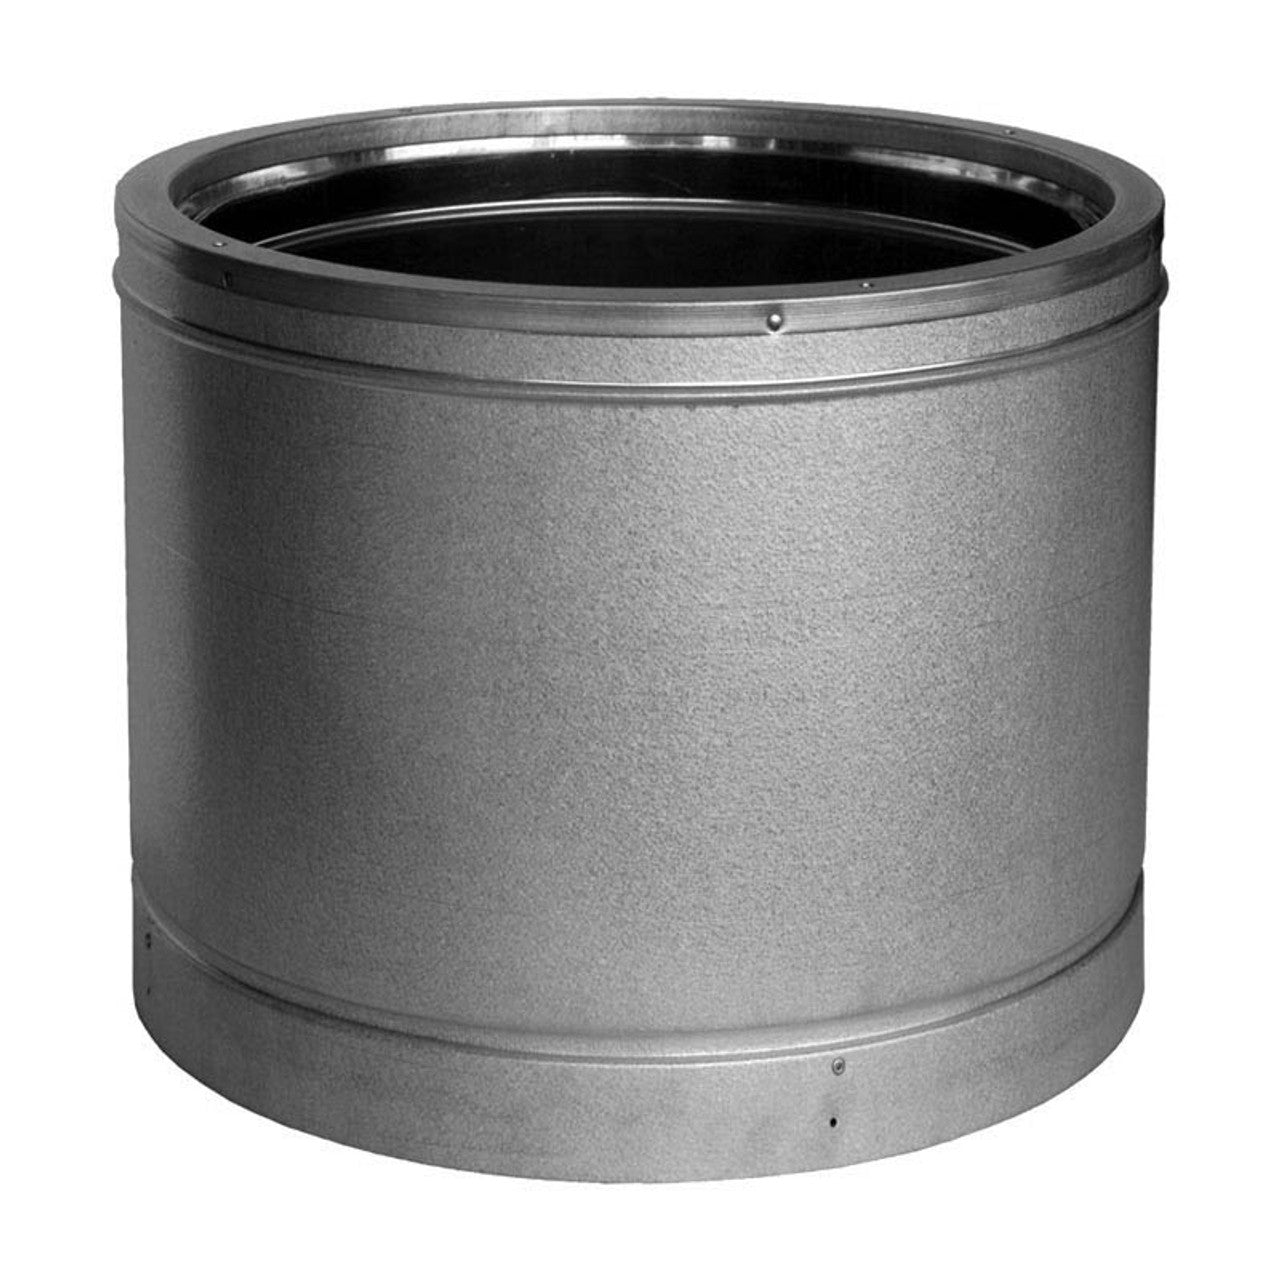 12" x 18" DuraVent DuraTech Double-Wall Stainless Steel Chimney Pipe - 12DT-18SS - Chimney Cricket